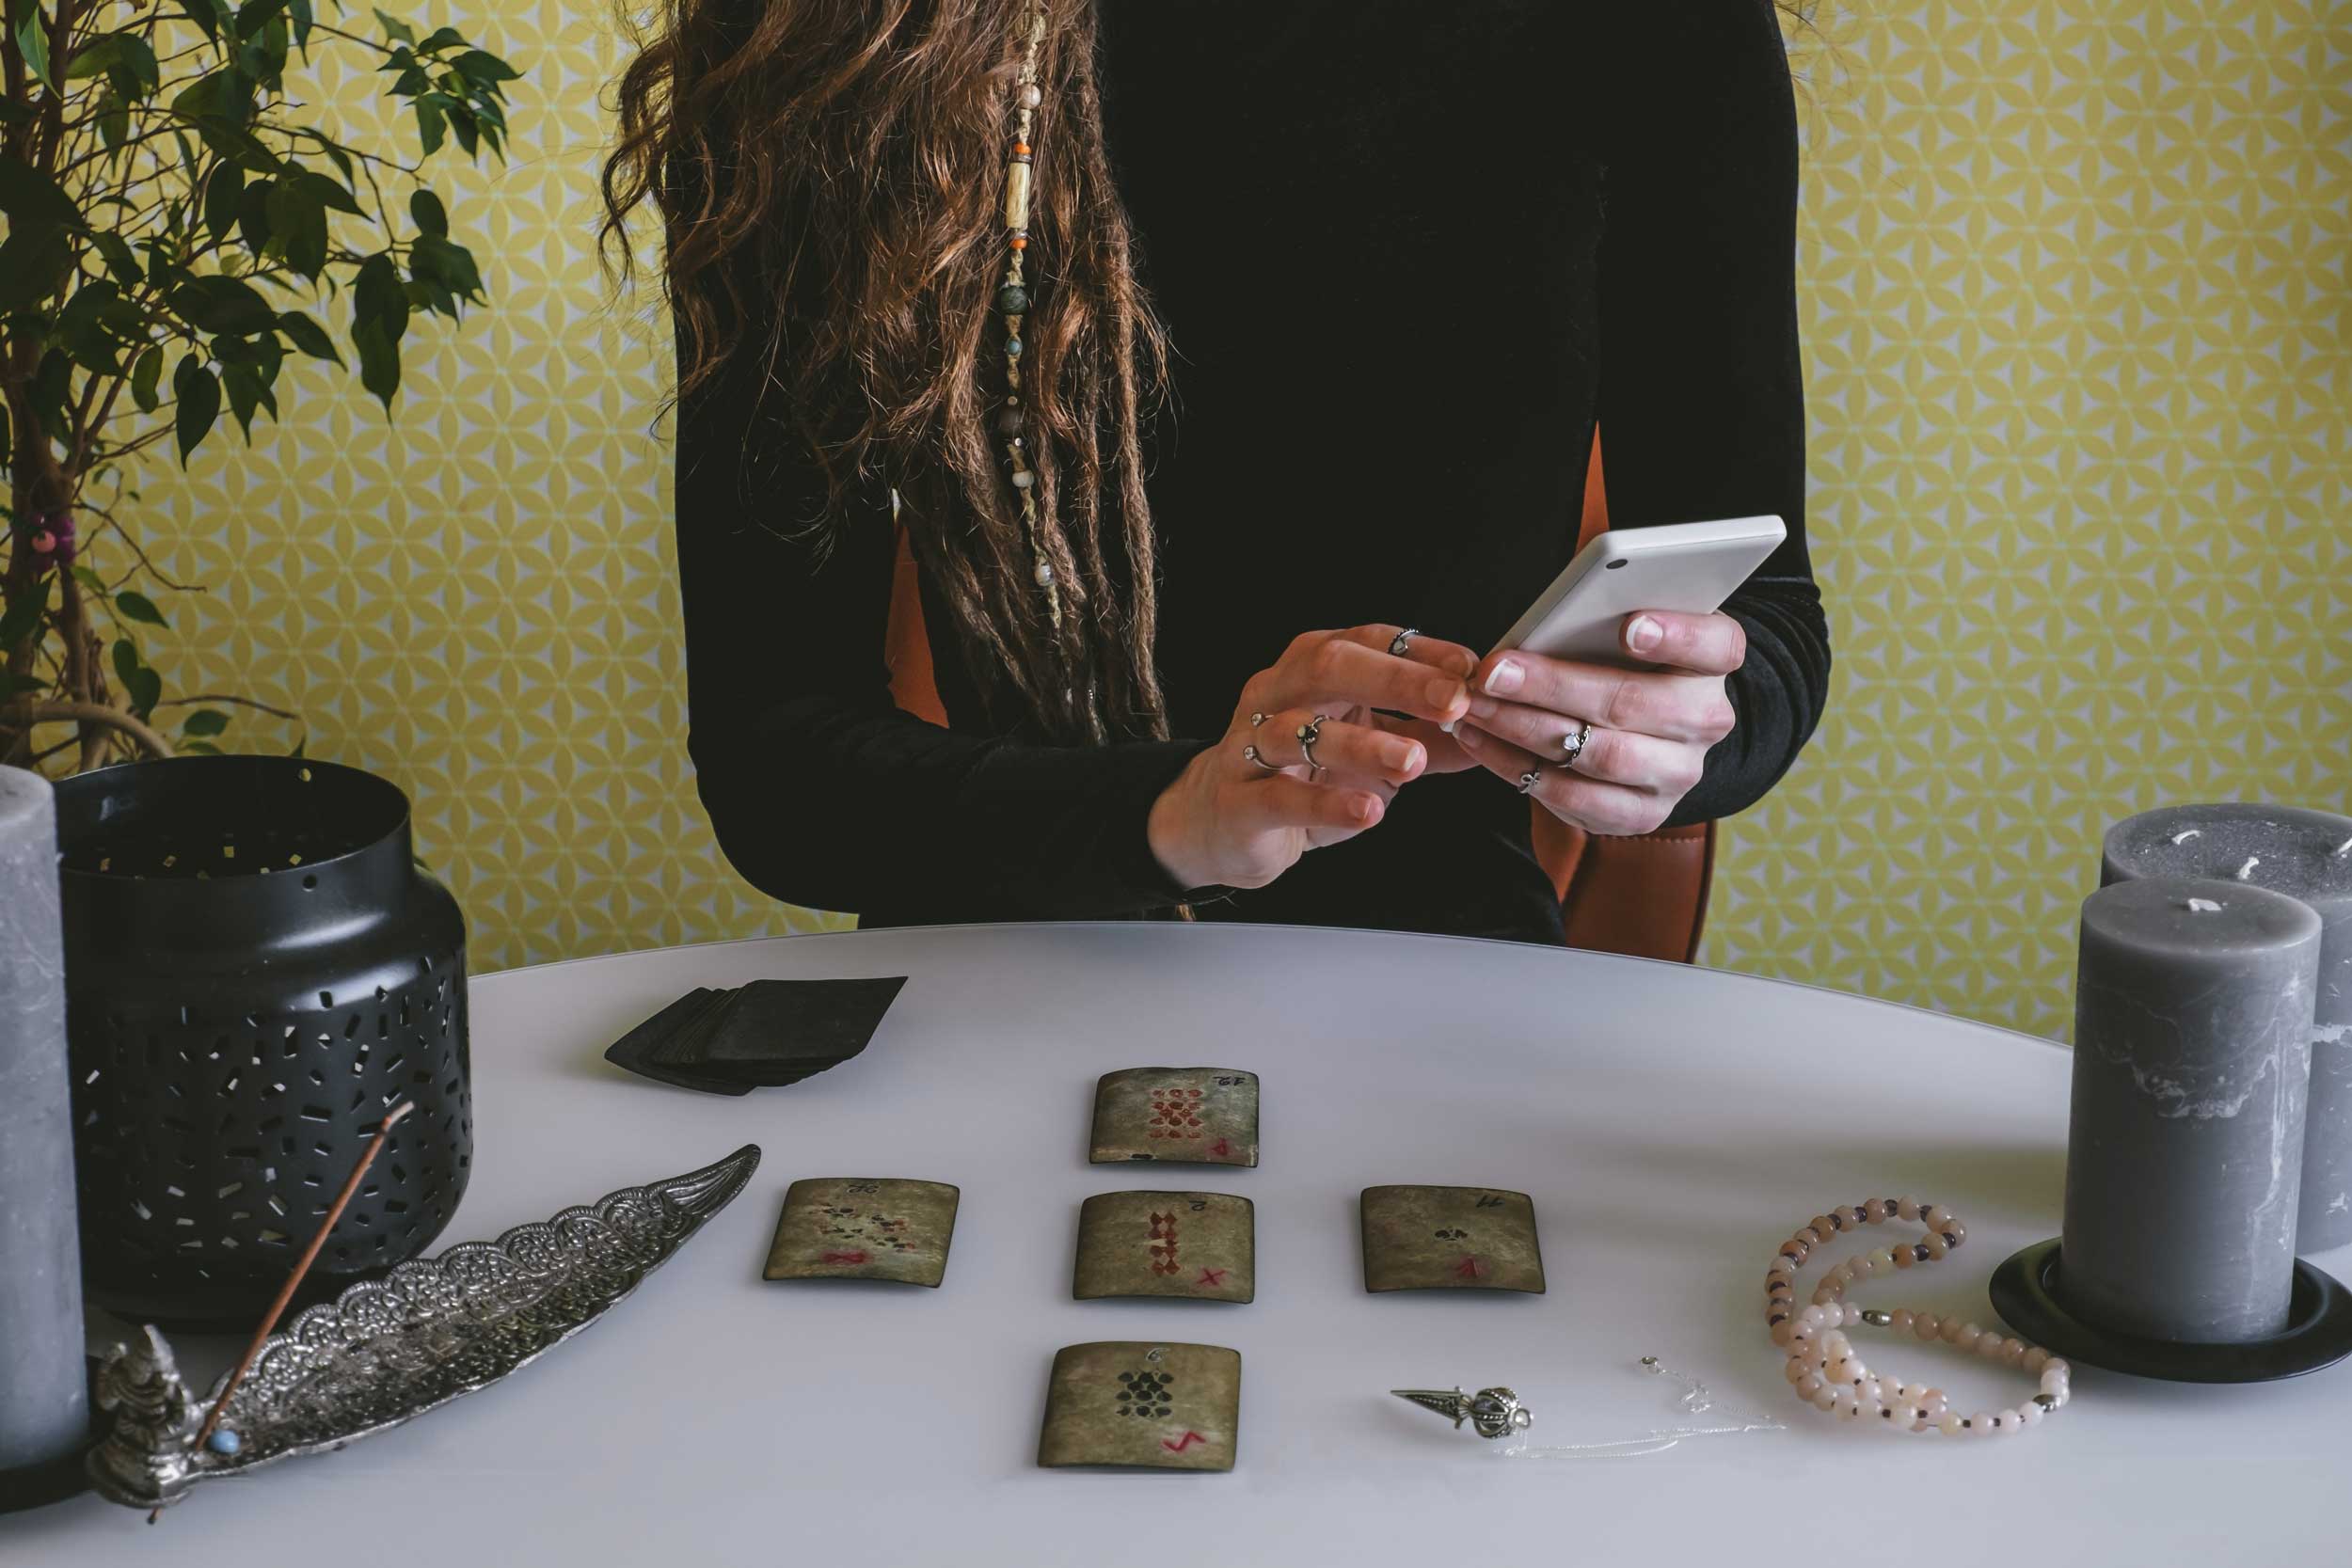 Woman holding a phone and reading tarot cards